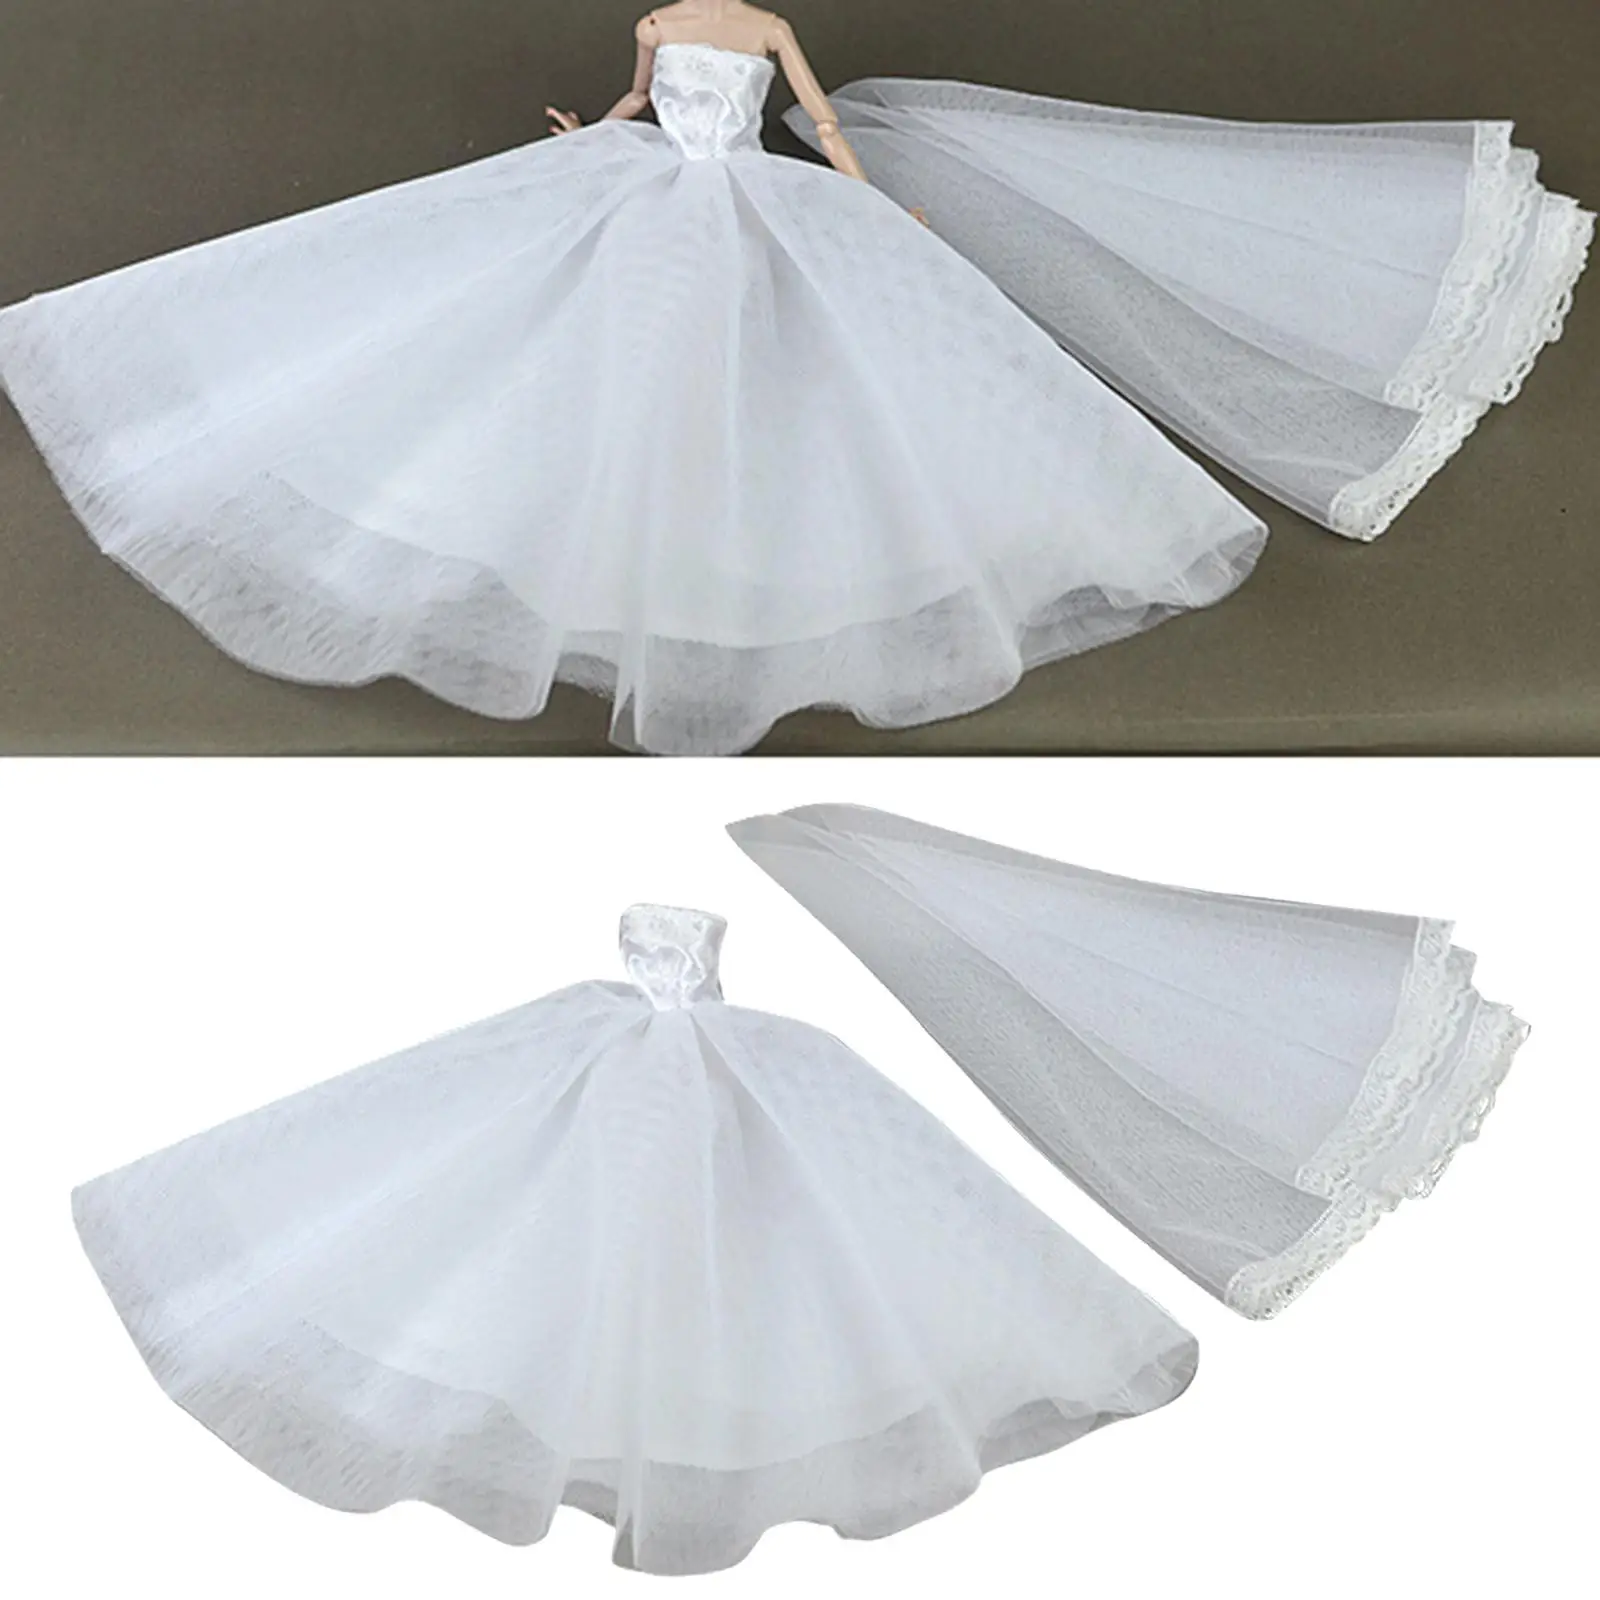 1/6 Dolls Wedding Dress with Long Lace Veil Dolls Gown Dress Evening Party Clothes Outfits for 12inch Dolls Clothes Dress